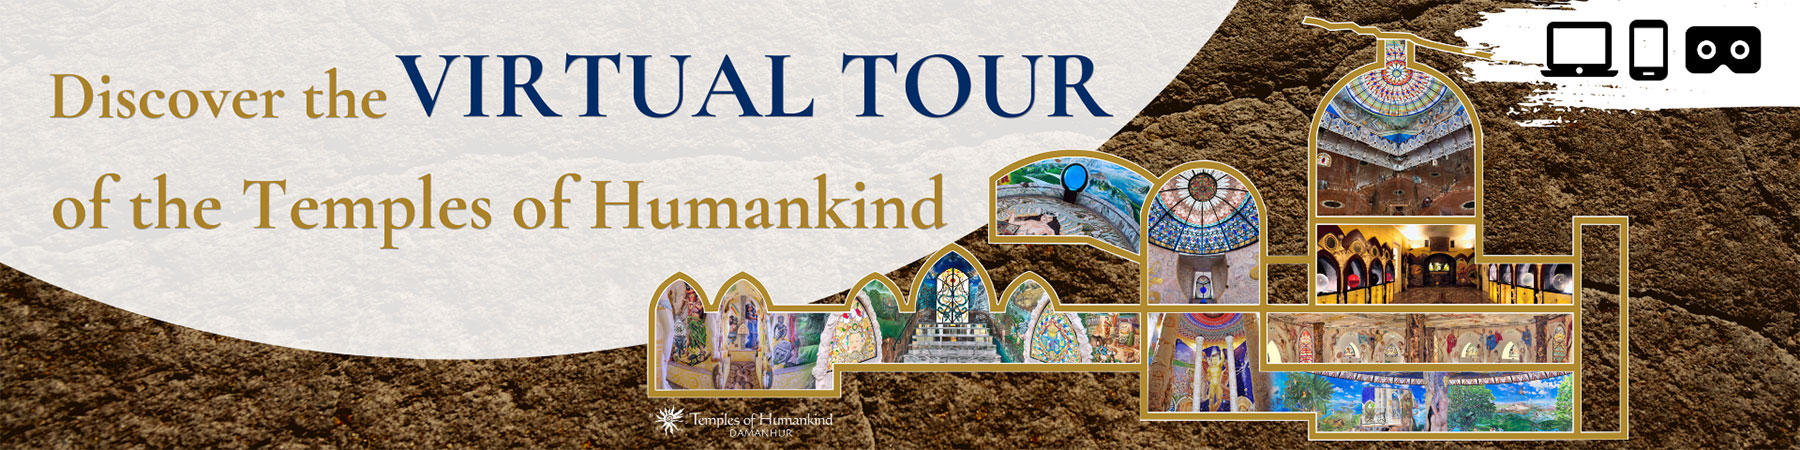 Temples of Humankind - Virtual Tour